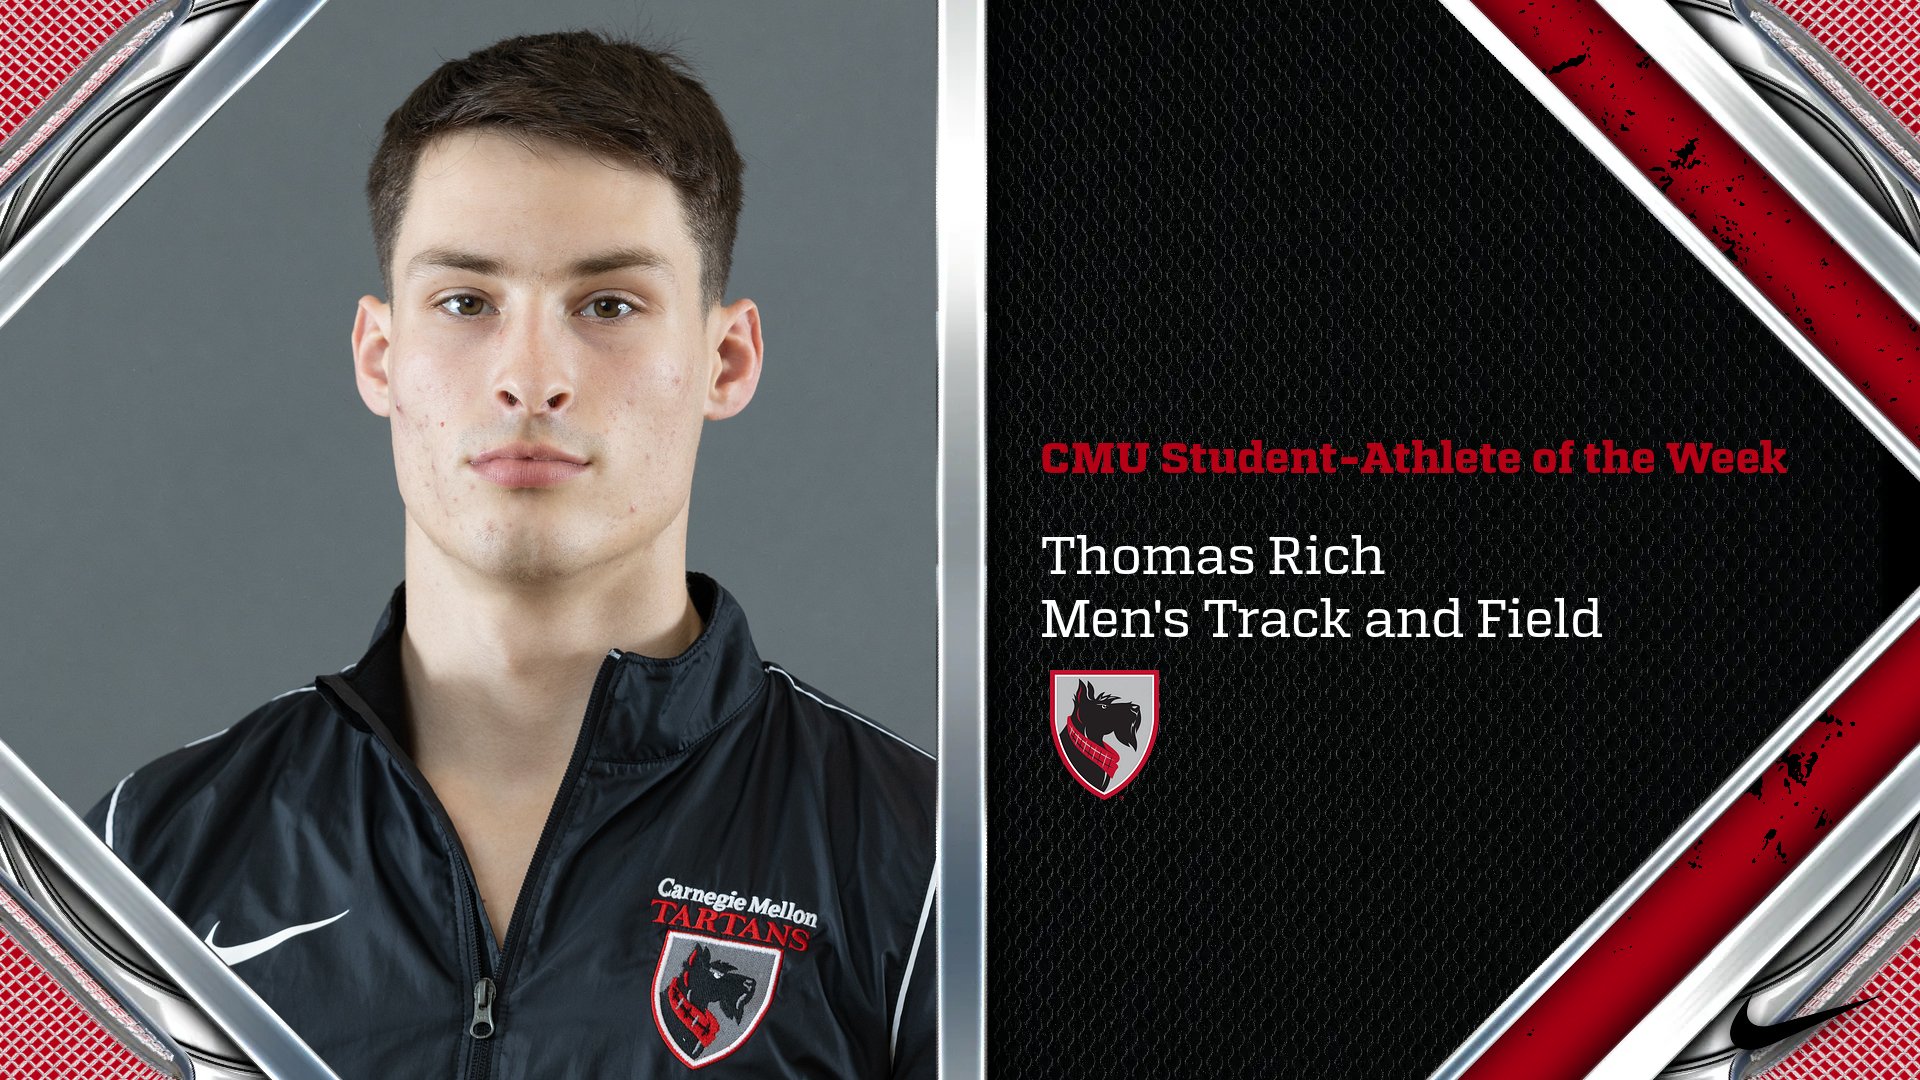 CMU Student-Athlete of the Week